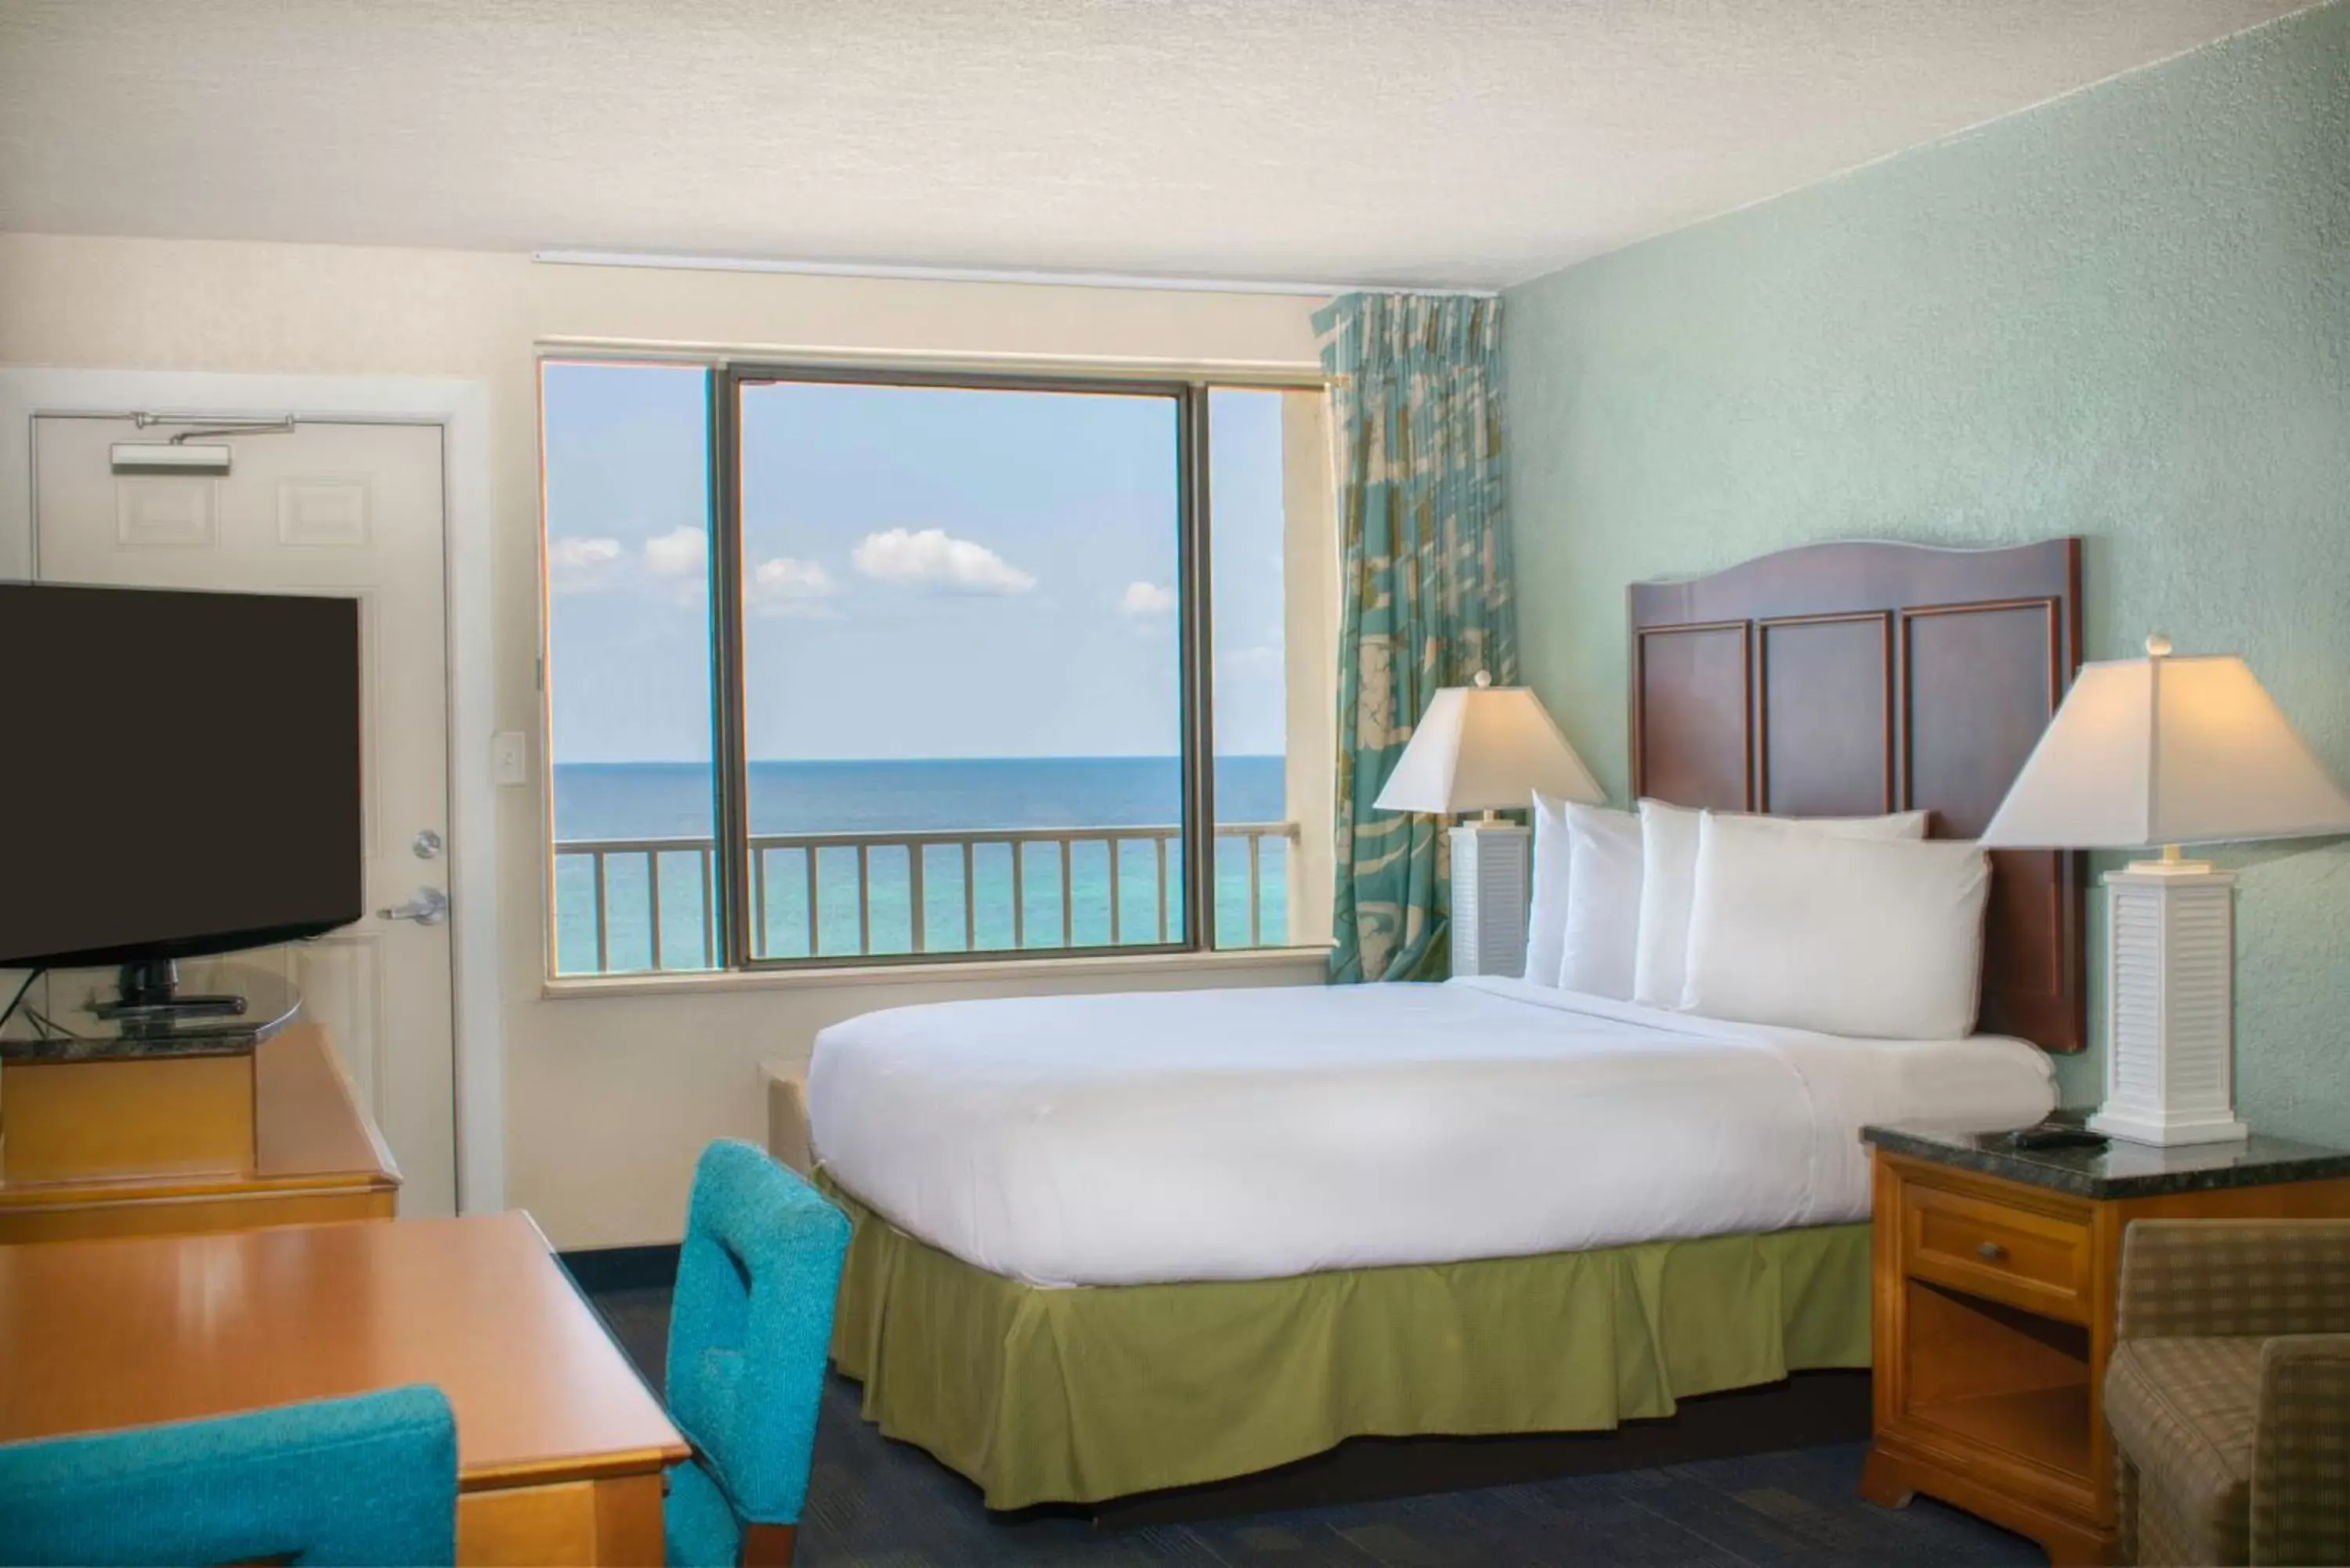 Deluxe Double Room with Balcony - Accessible in Beachside Resort Panama City Beach